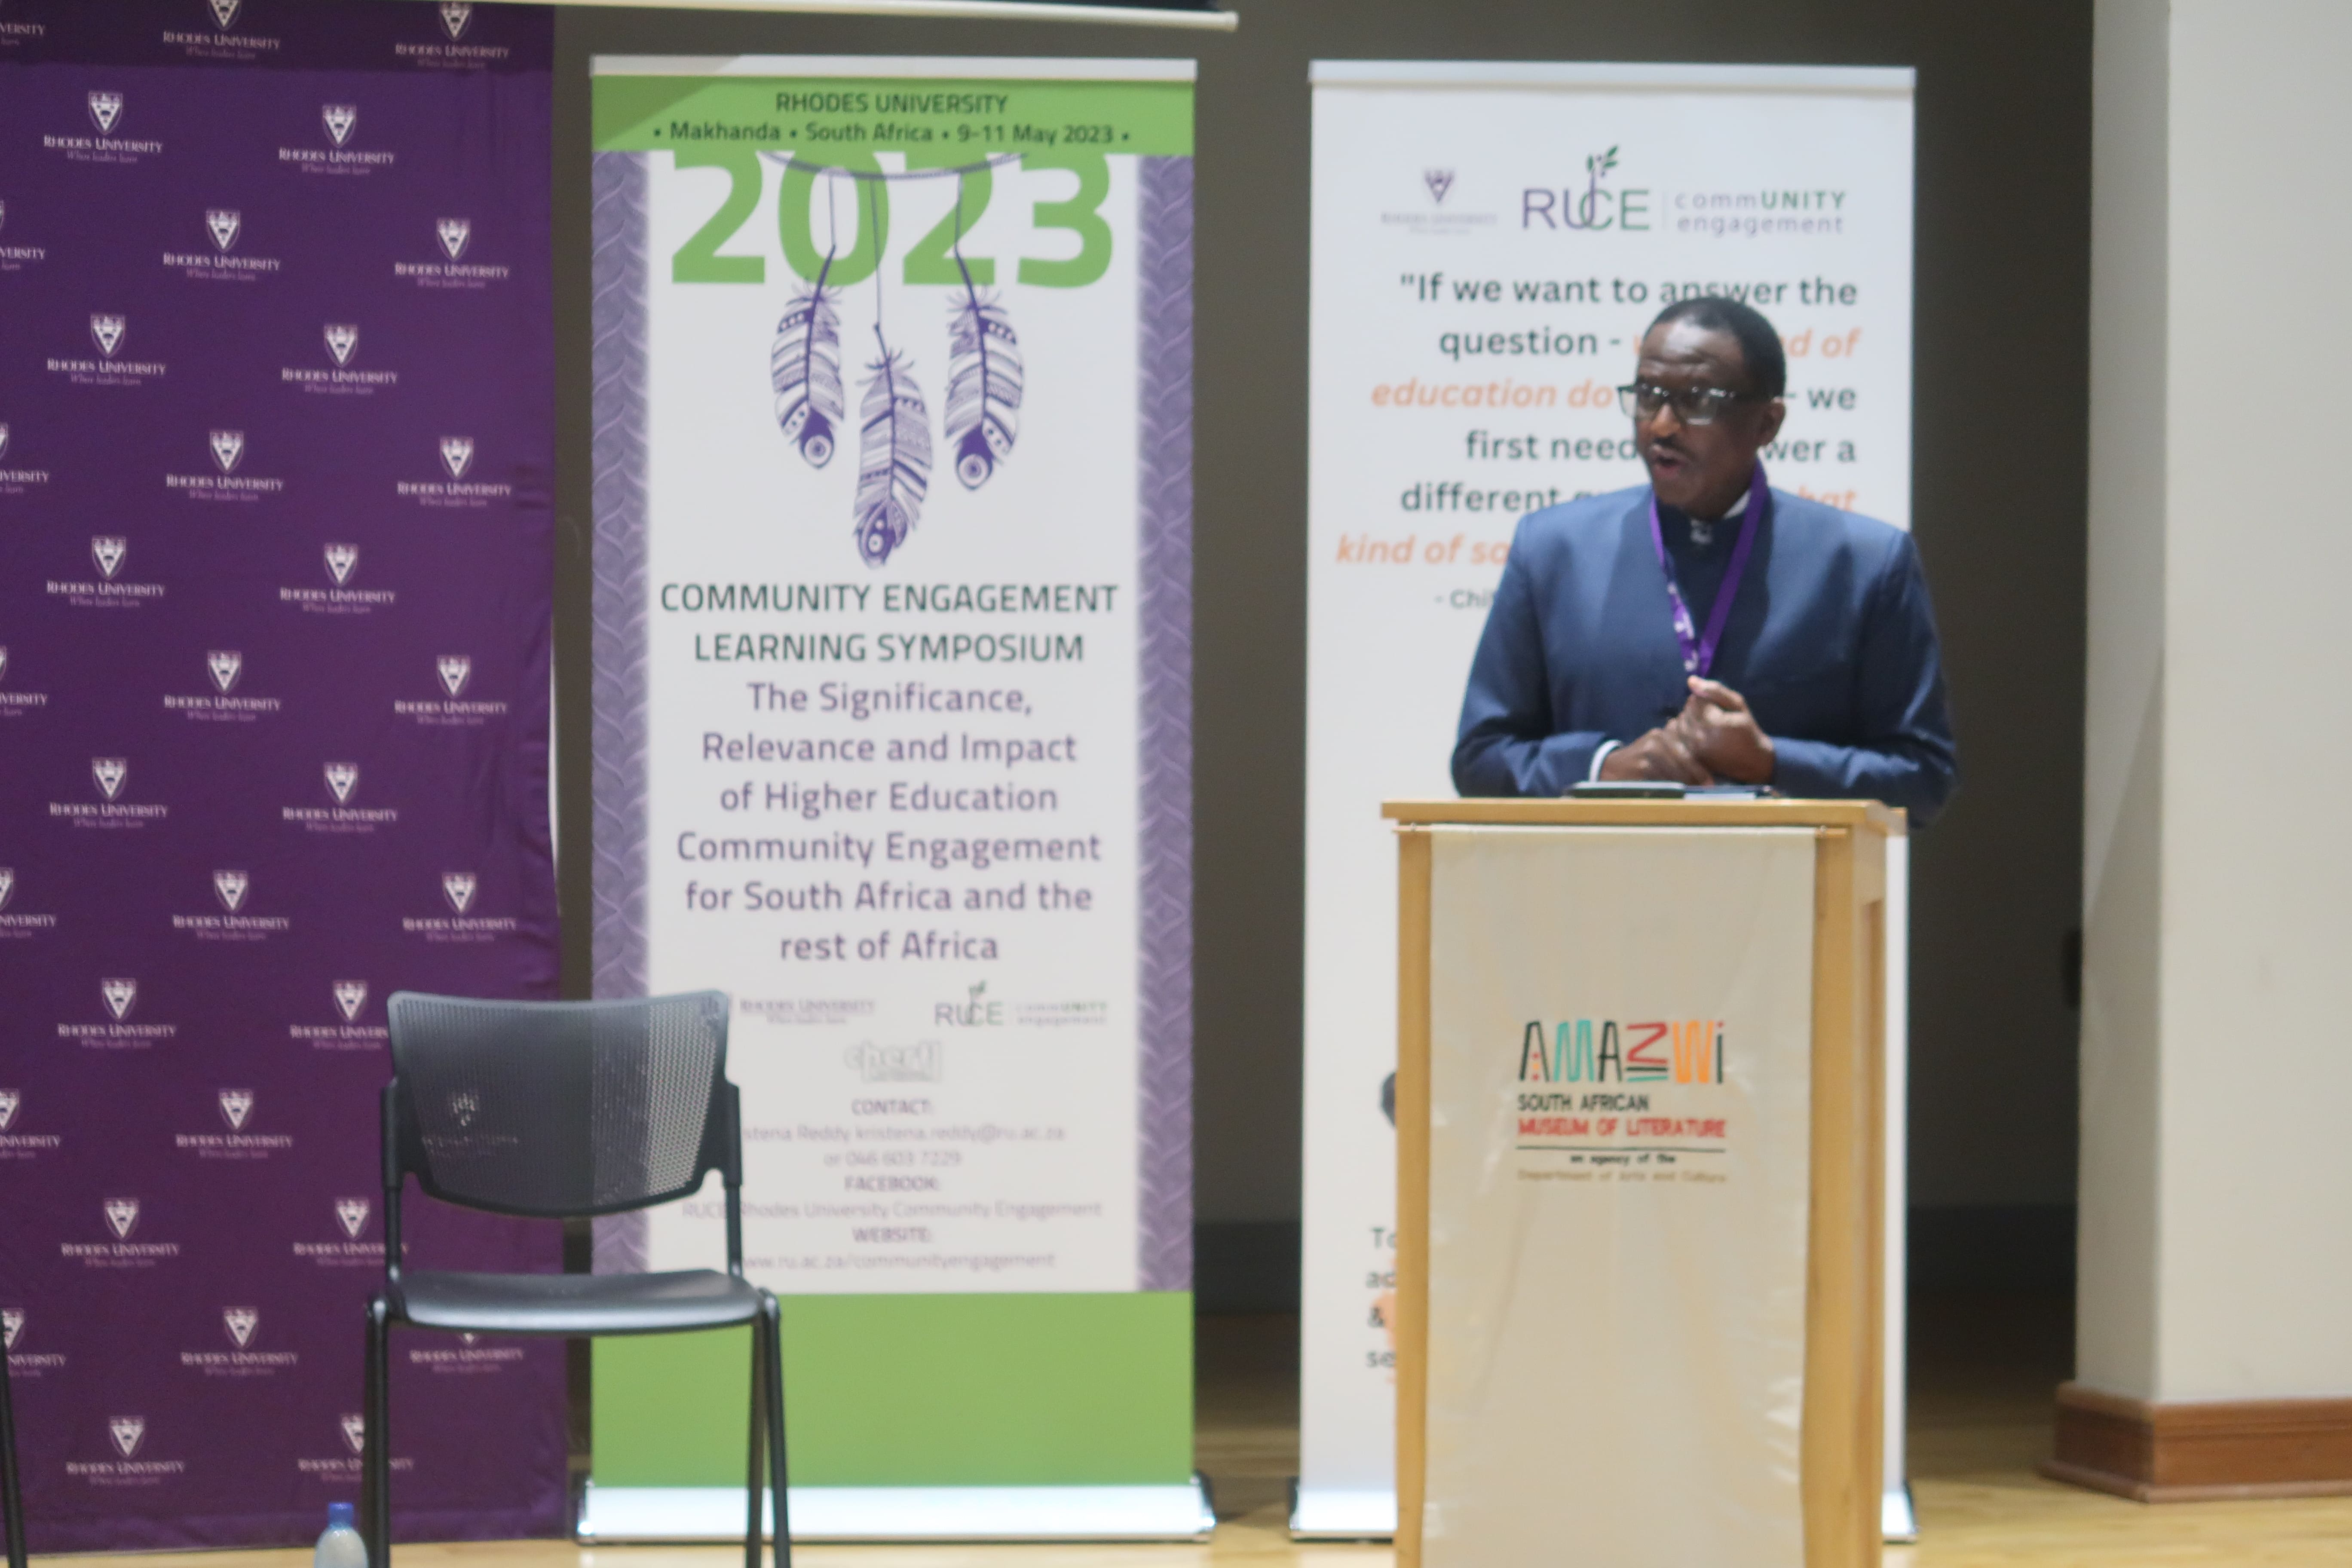 Vice Chancellor welcoming guests to thee 2023 Community Engagement Learning Symposium